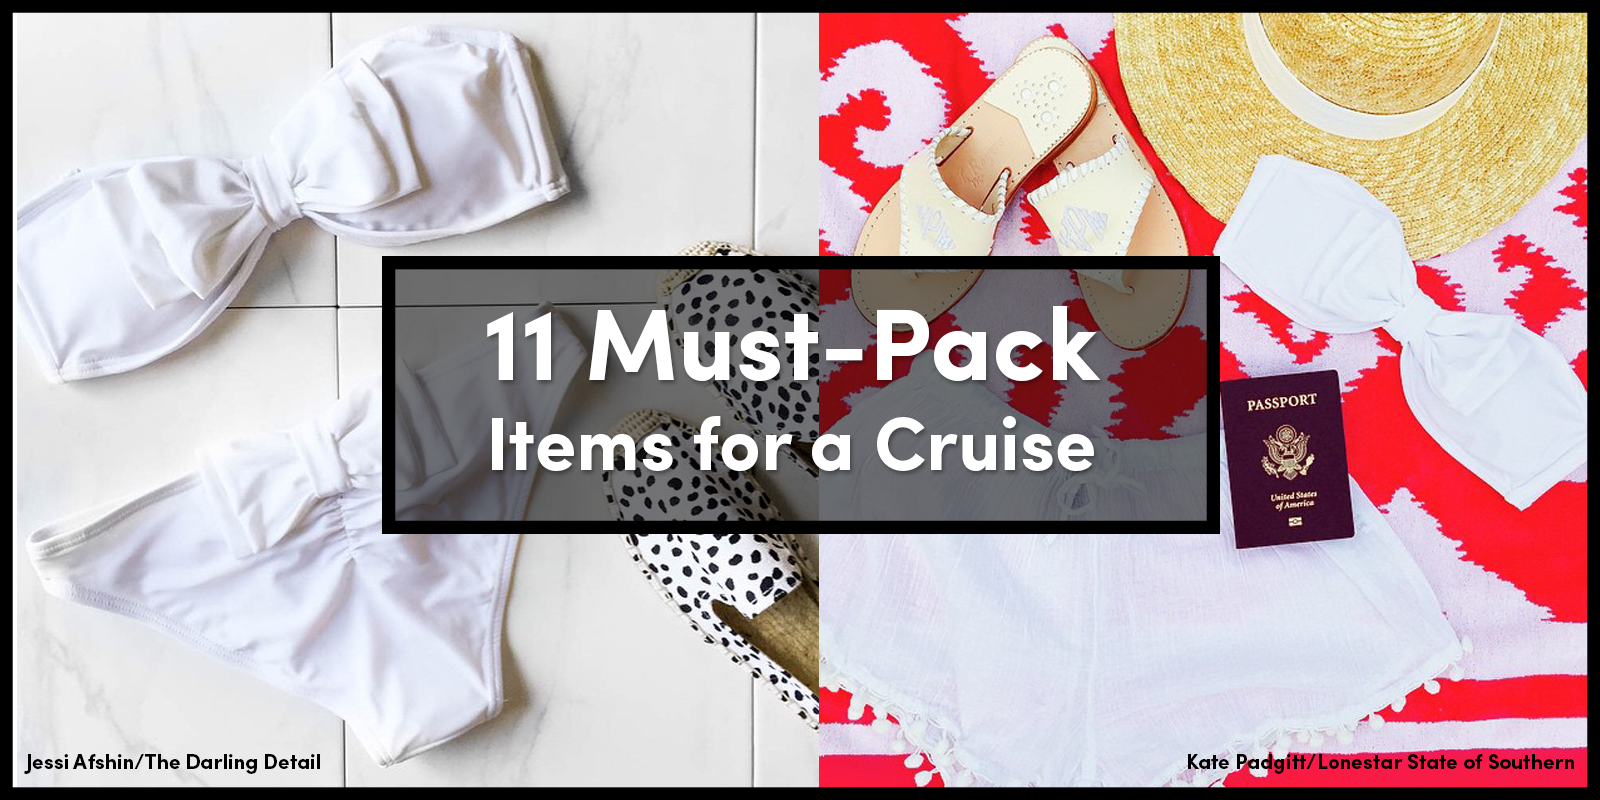 What type of clothing should you pack for a cruise?